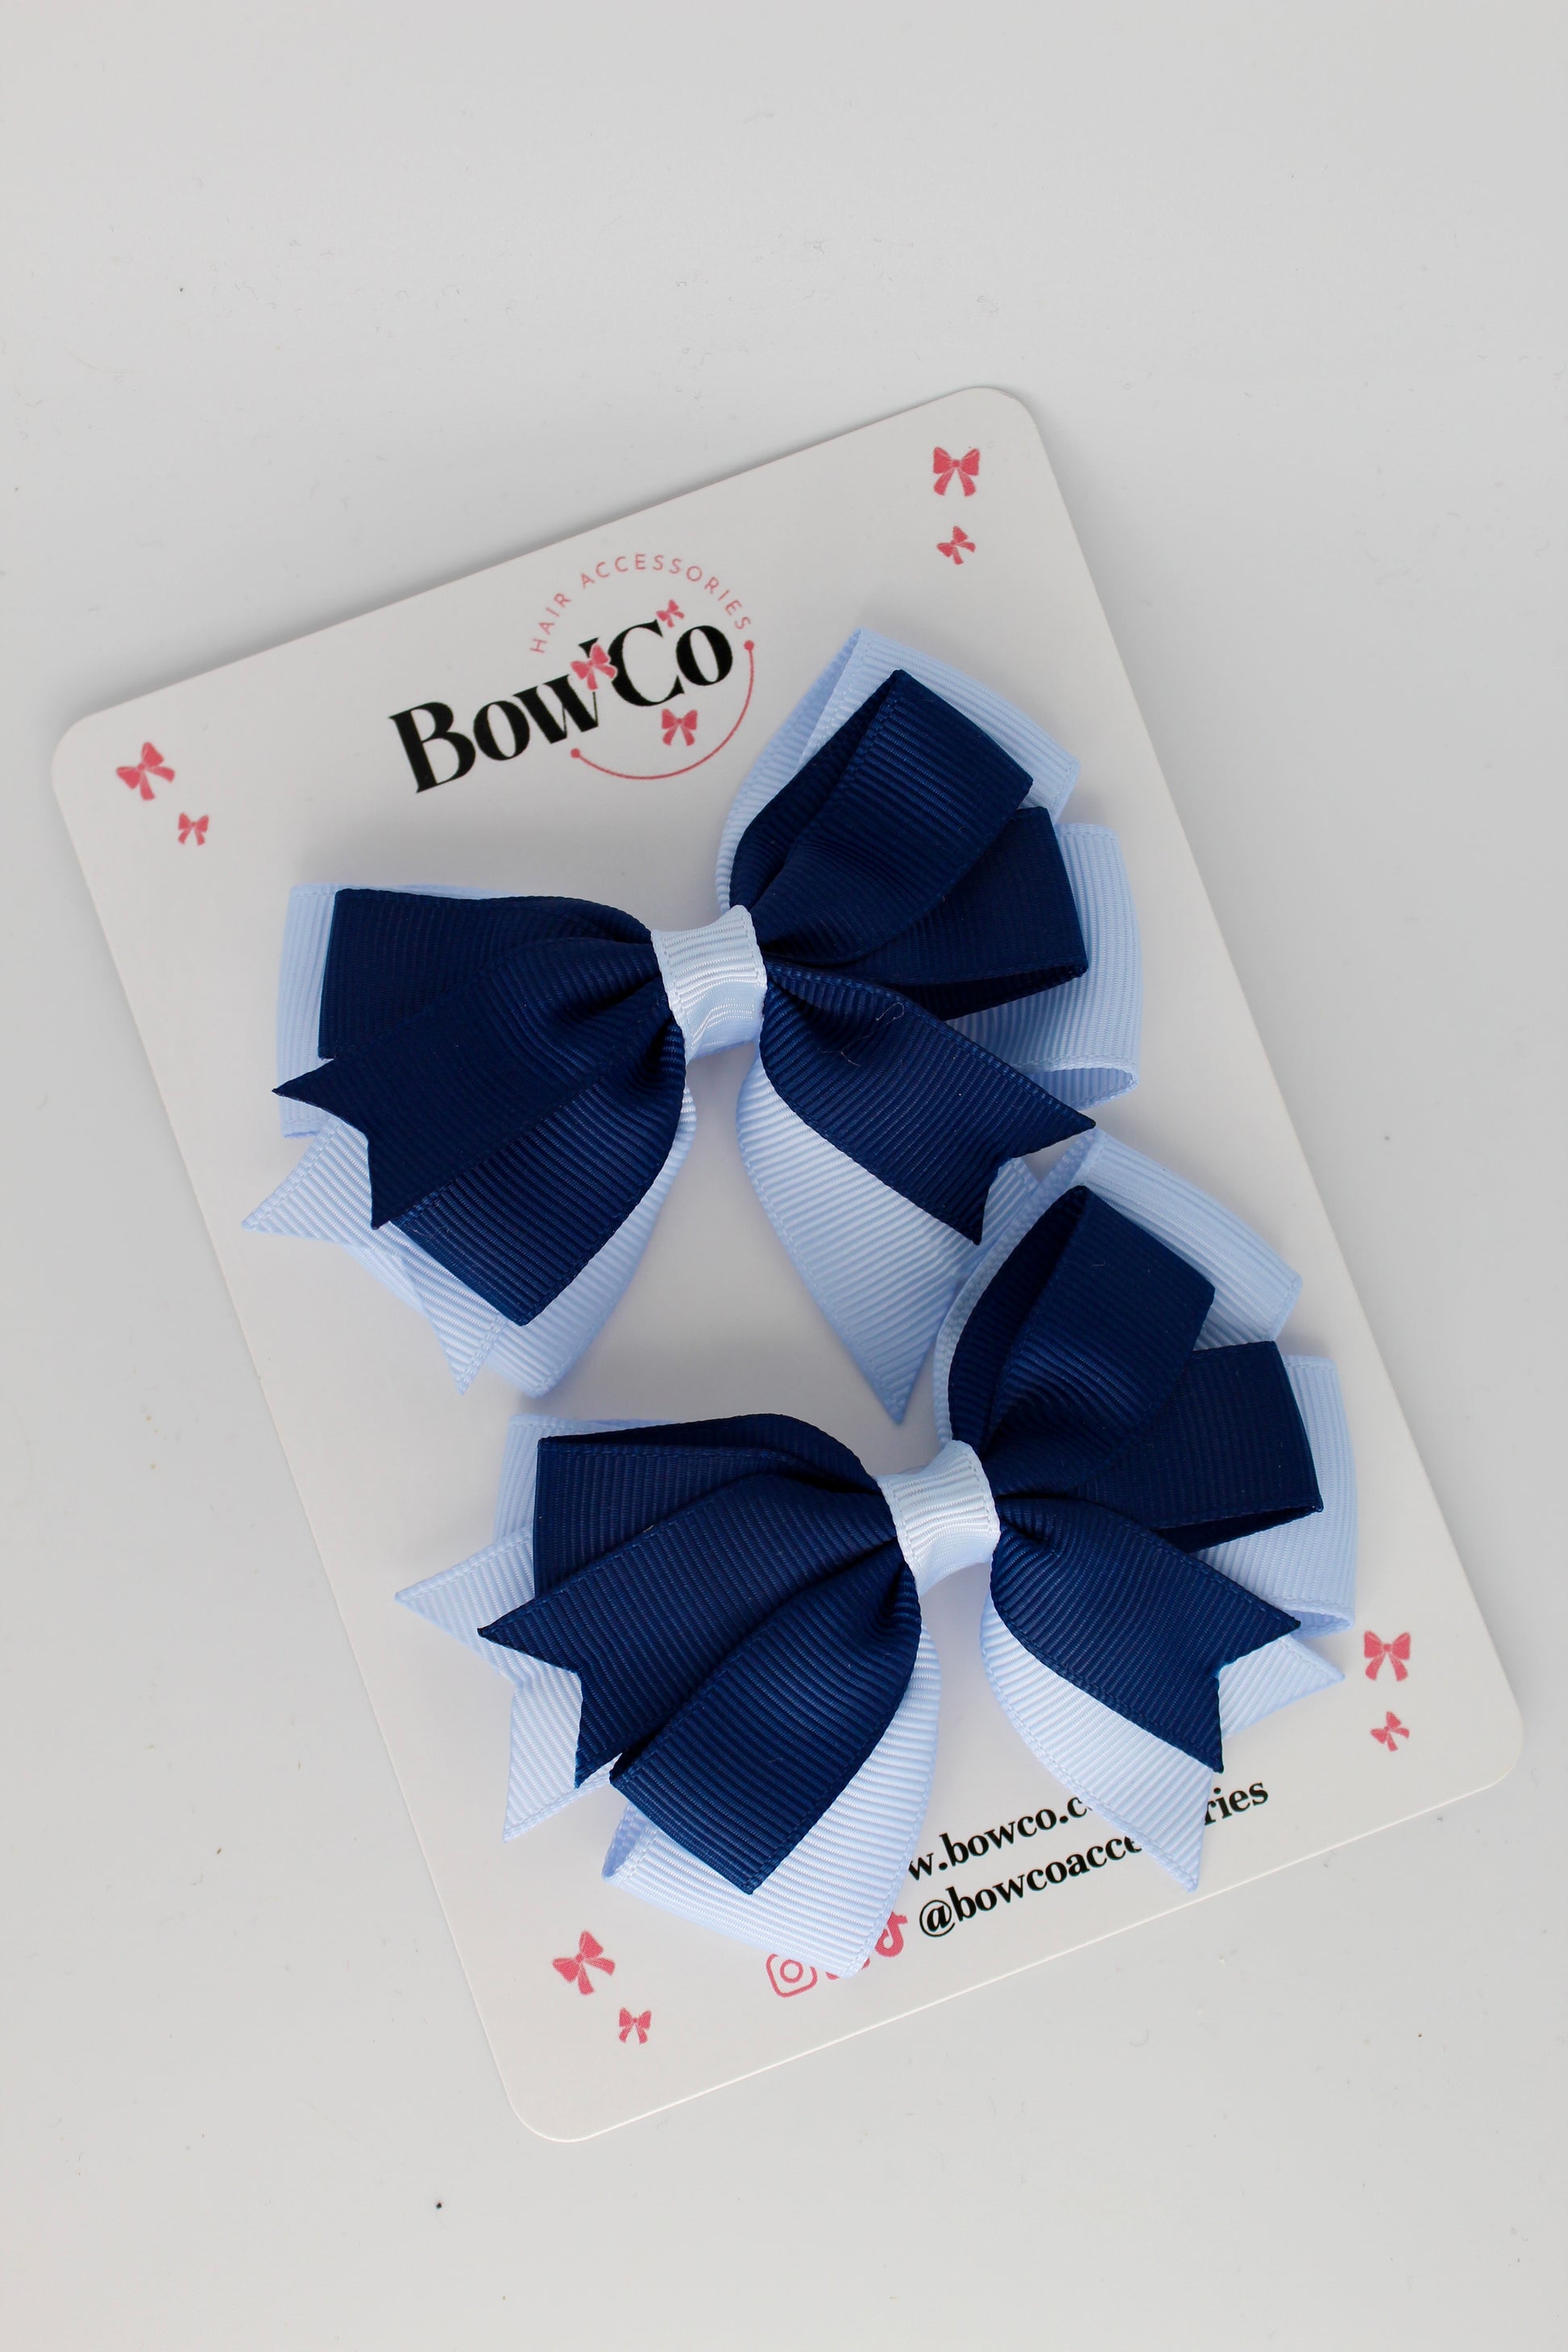 3 Inch Double Tail Bow - Clip - 2 Pack - Navy Blue and Bluebell